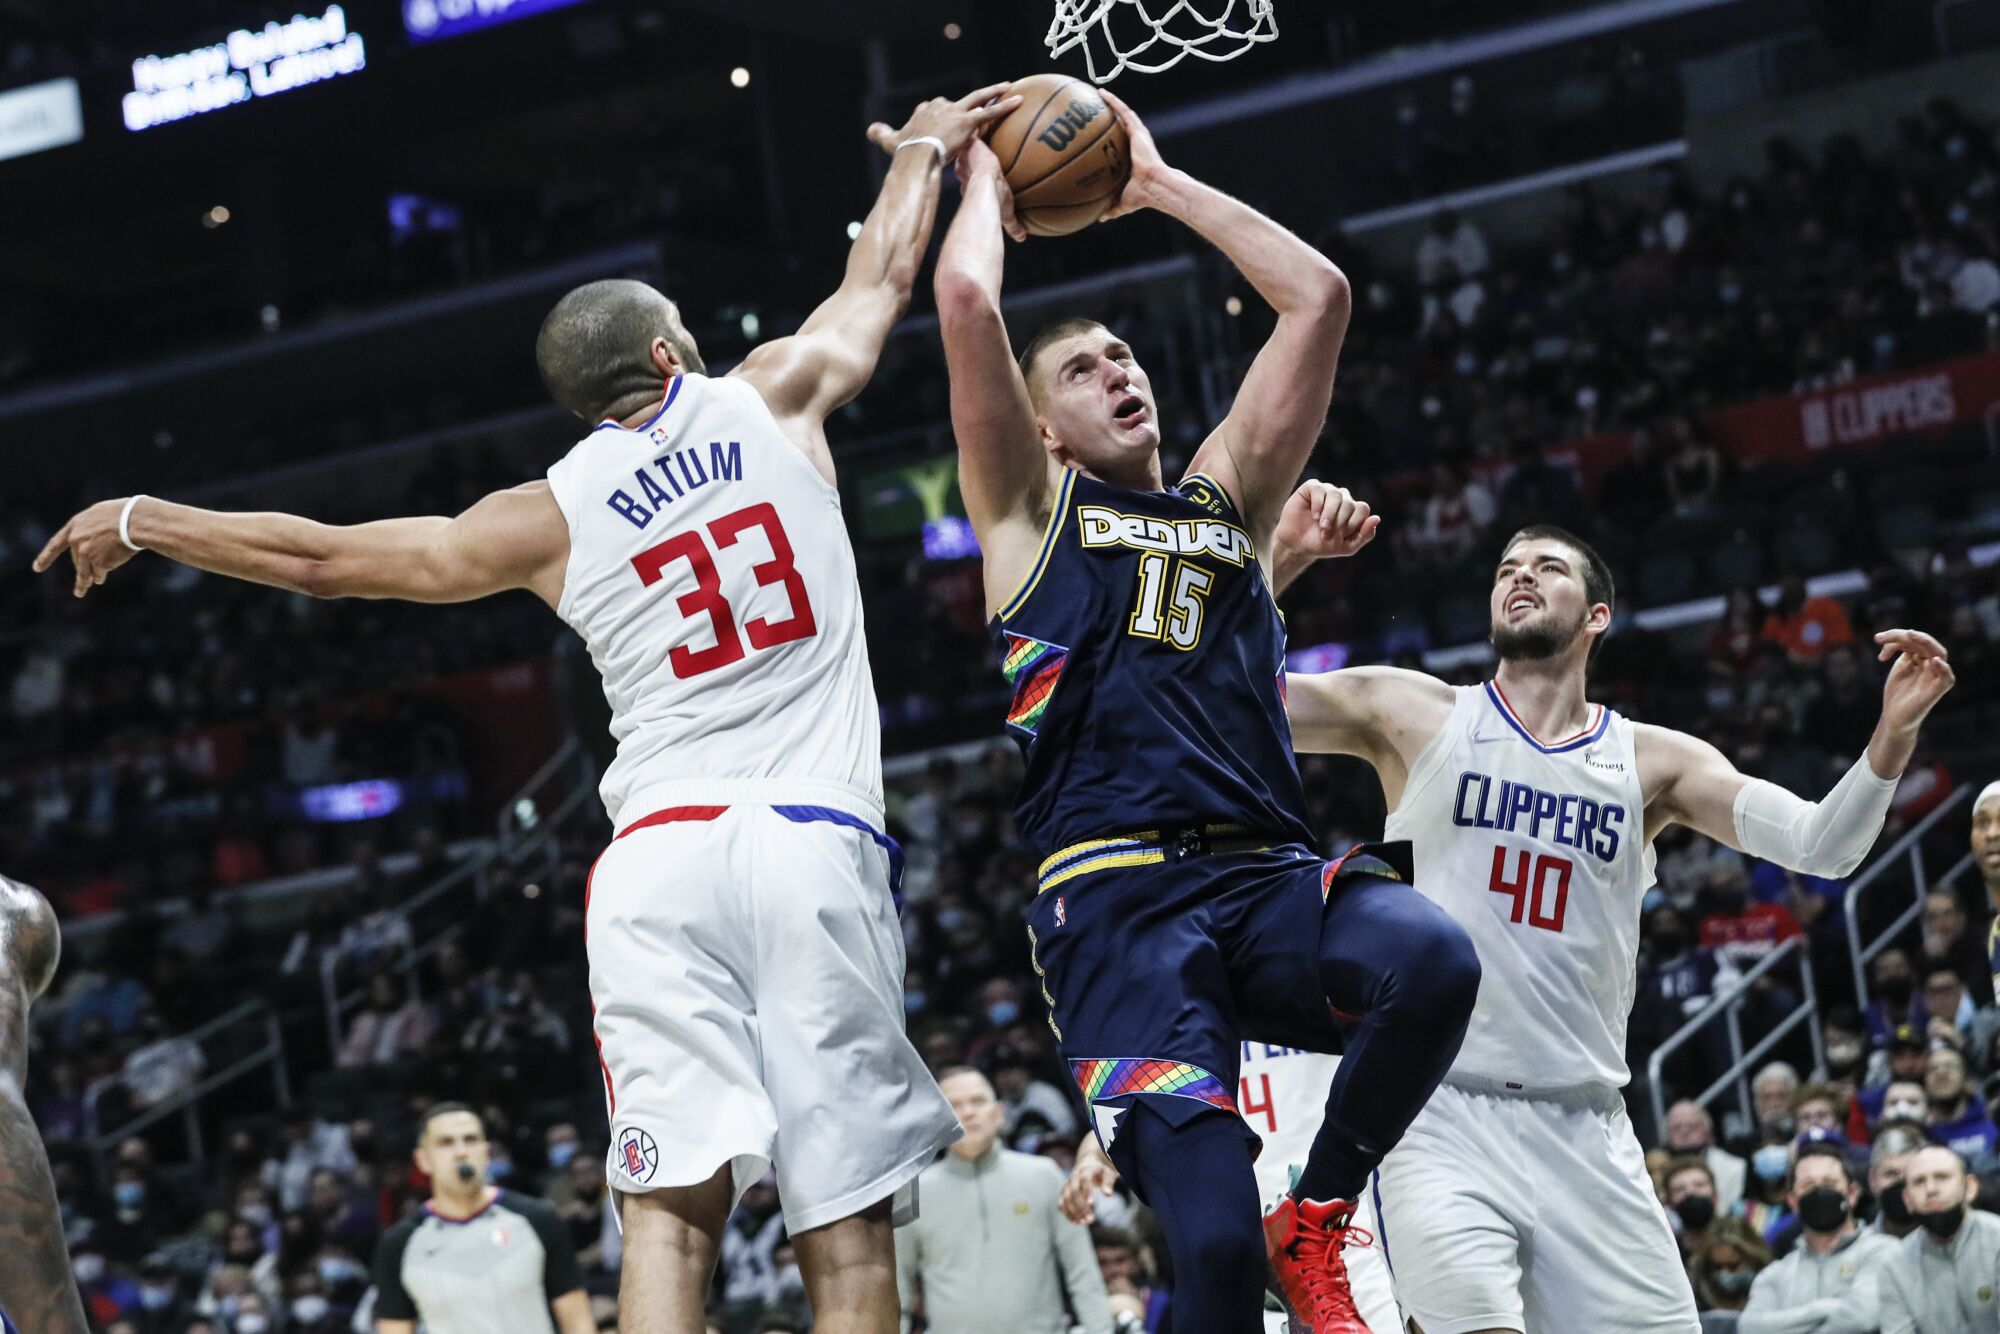 Clippers forward Nicolas Batum gets his fingertips on a layup attempt by Nuggets center Nikola Jokic.